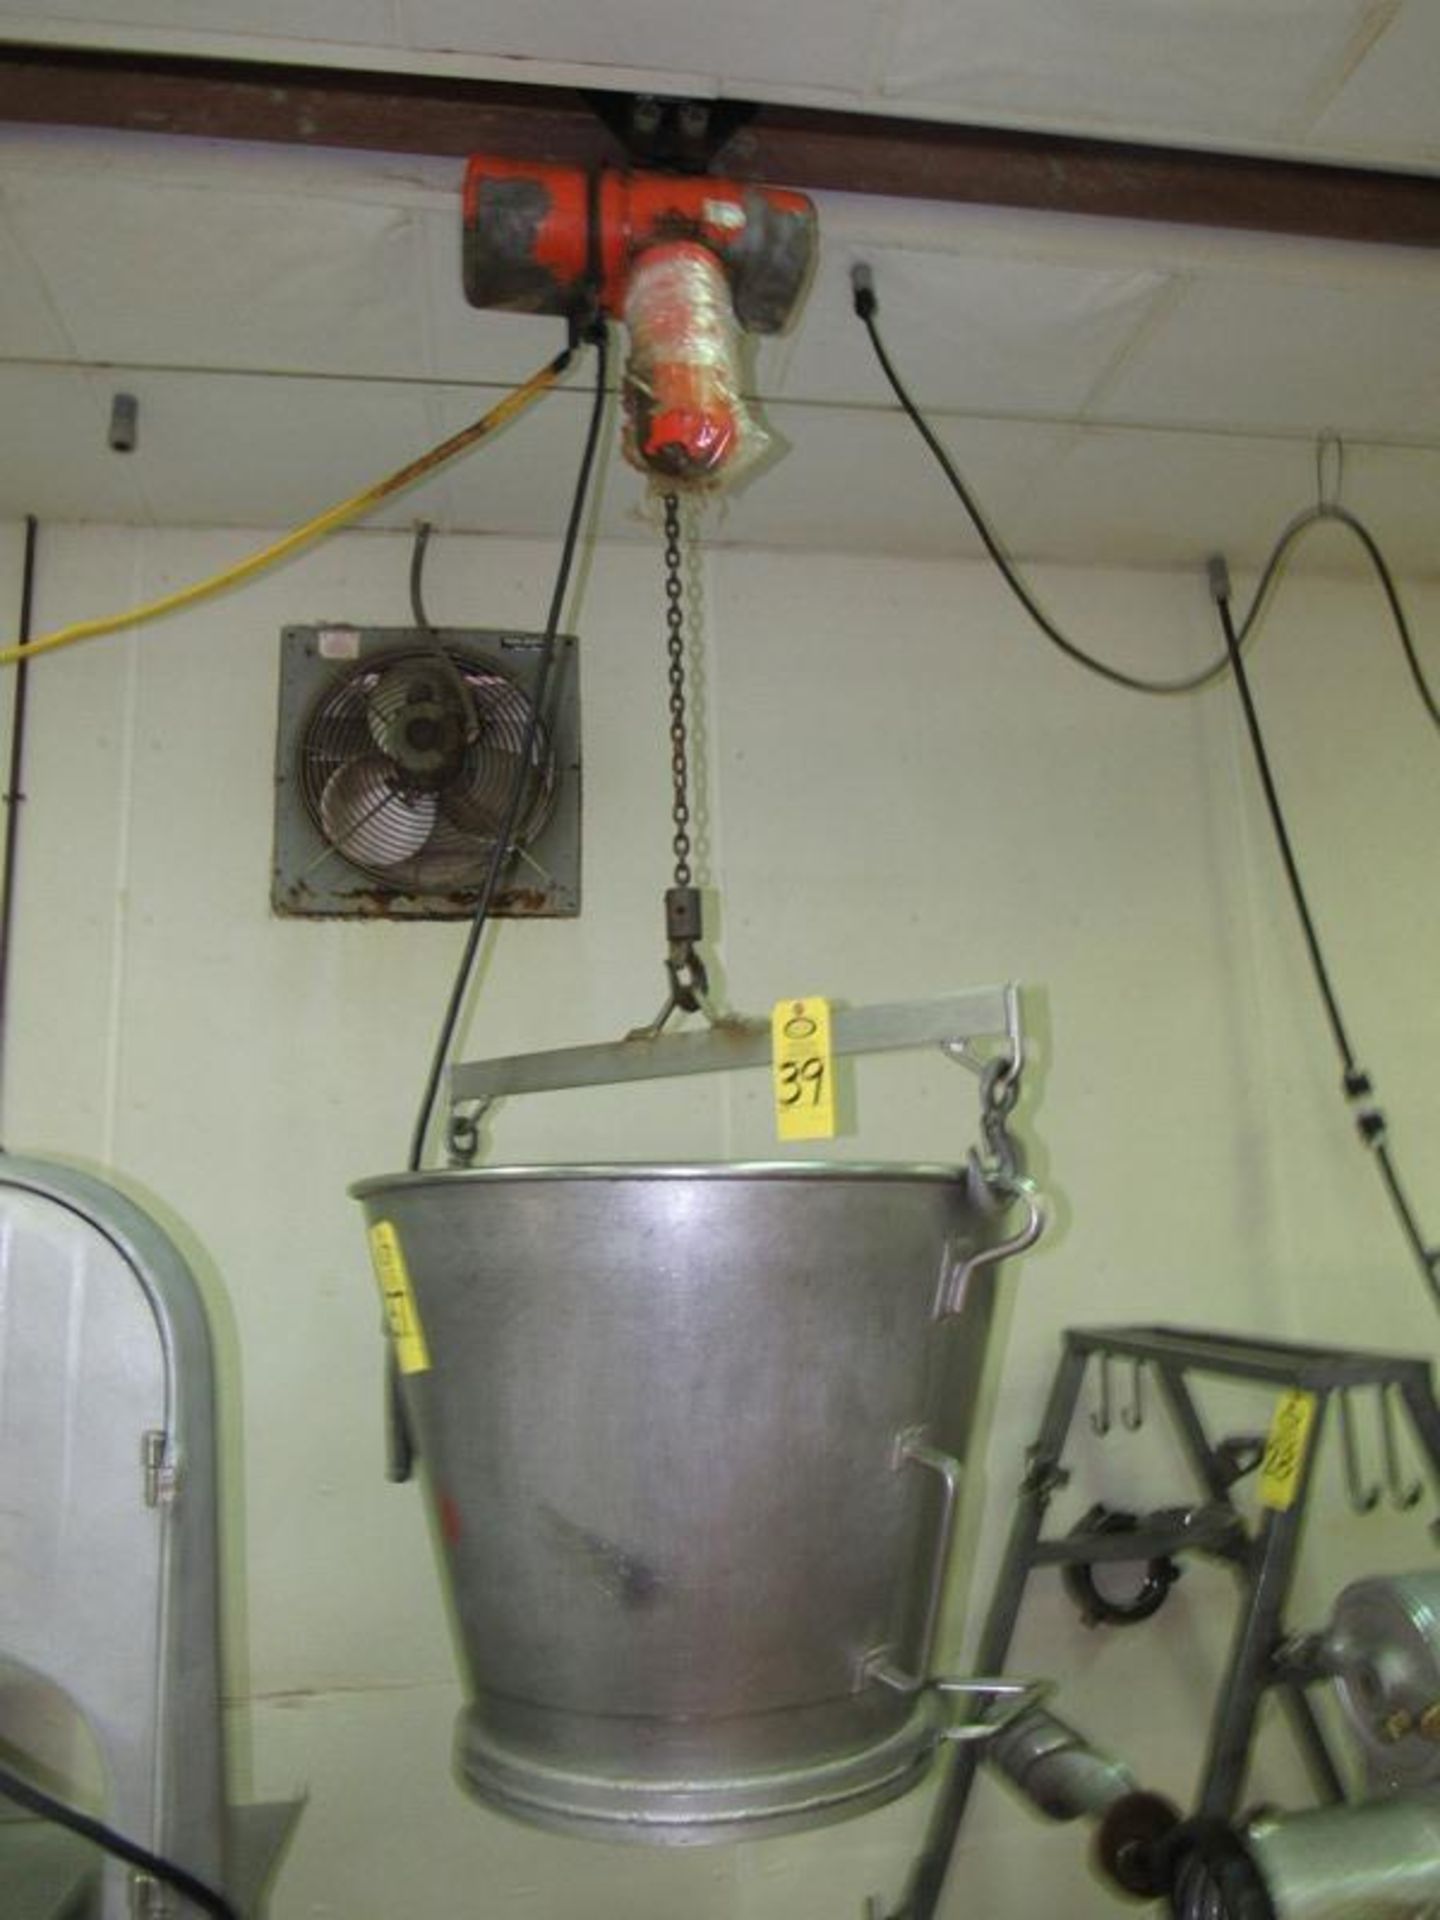 CM Loadster Hoist, 1/2 ton with controls, 36" wide stainless steel attachment, used for dump vats ( - Image 2 of 2